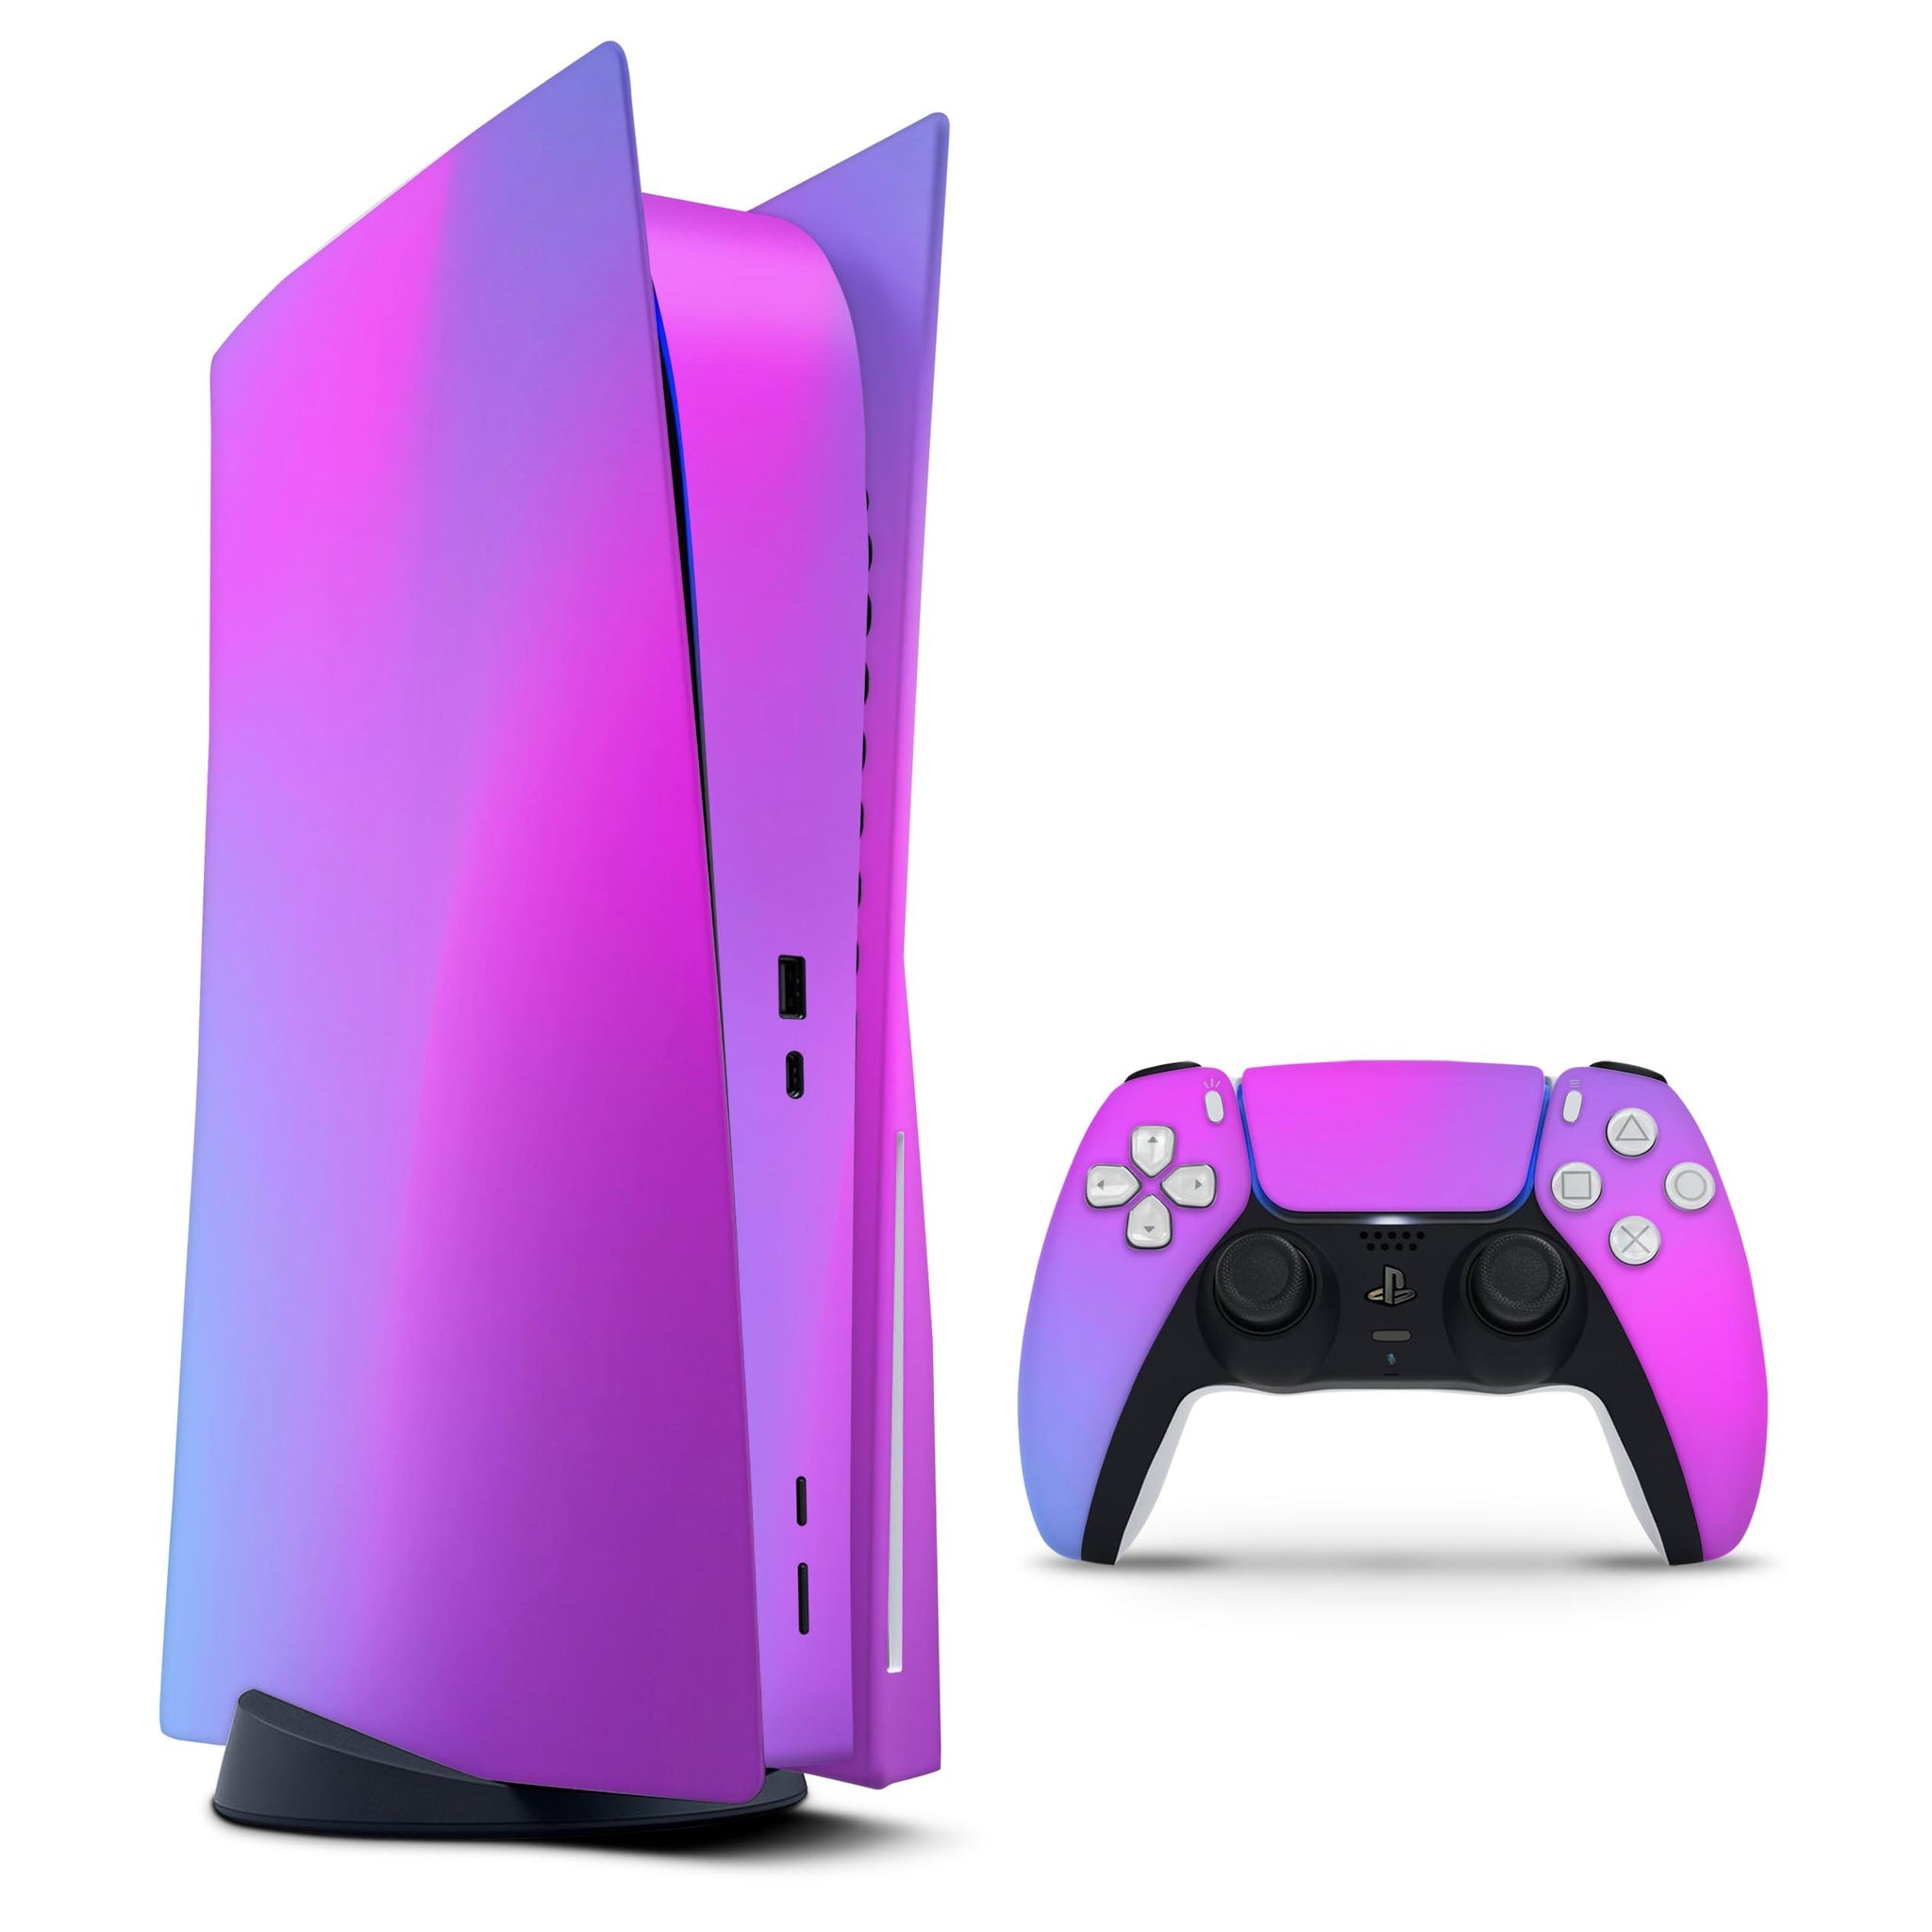 Neon Holographic V1 - Full Body Skin Decal Wrap Kit for Sony